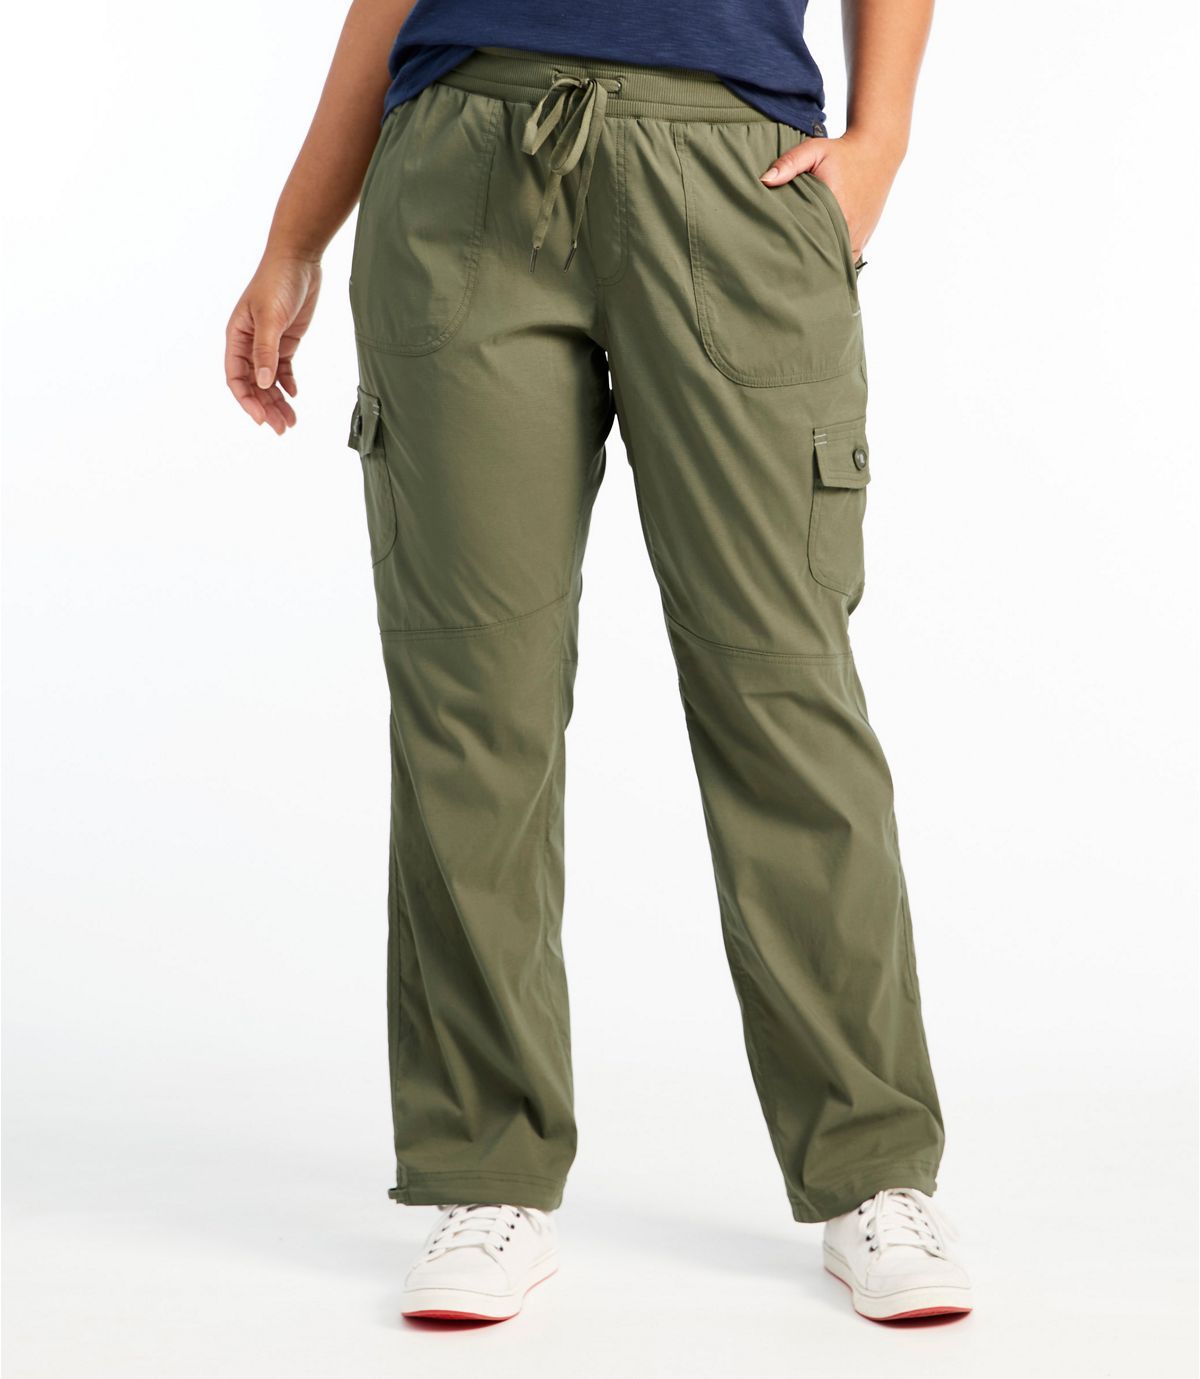 Best Plus-Size Hiking Pants for Women 